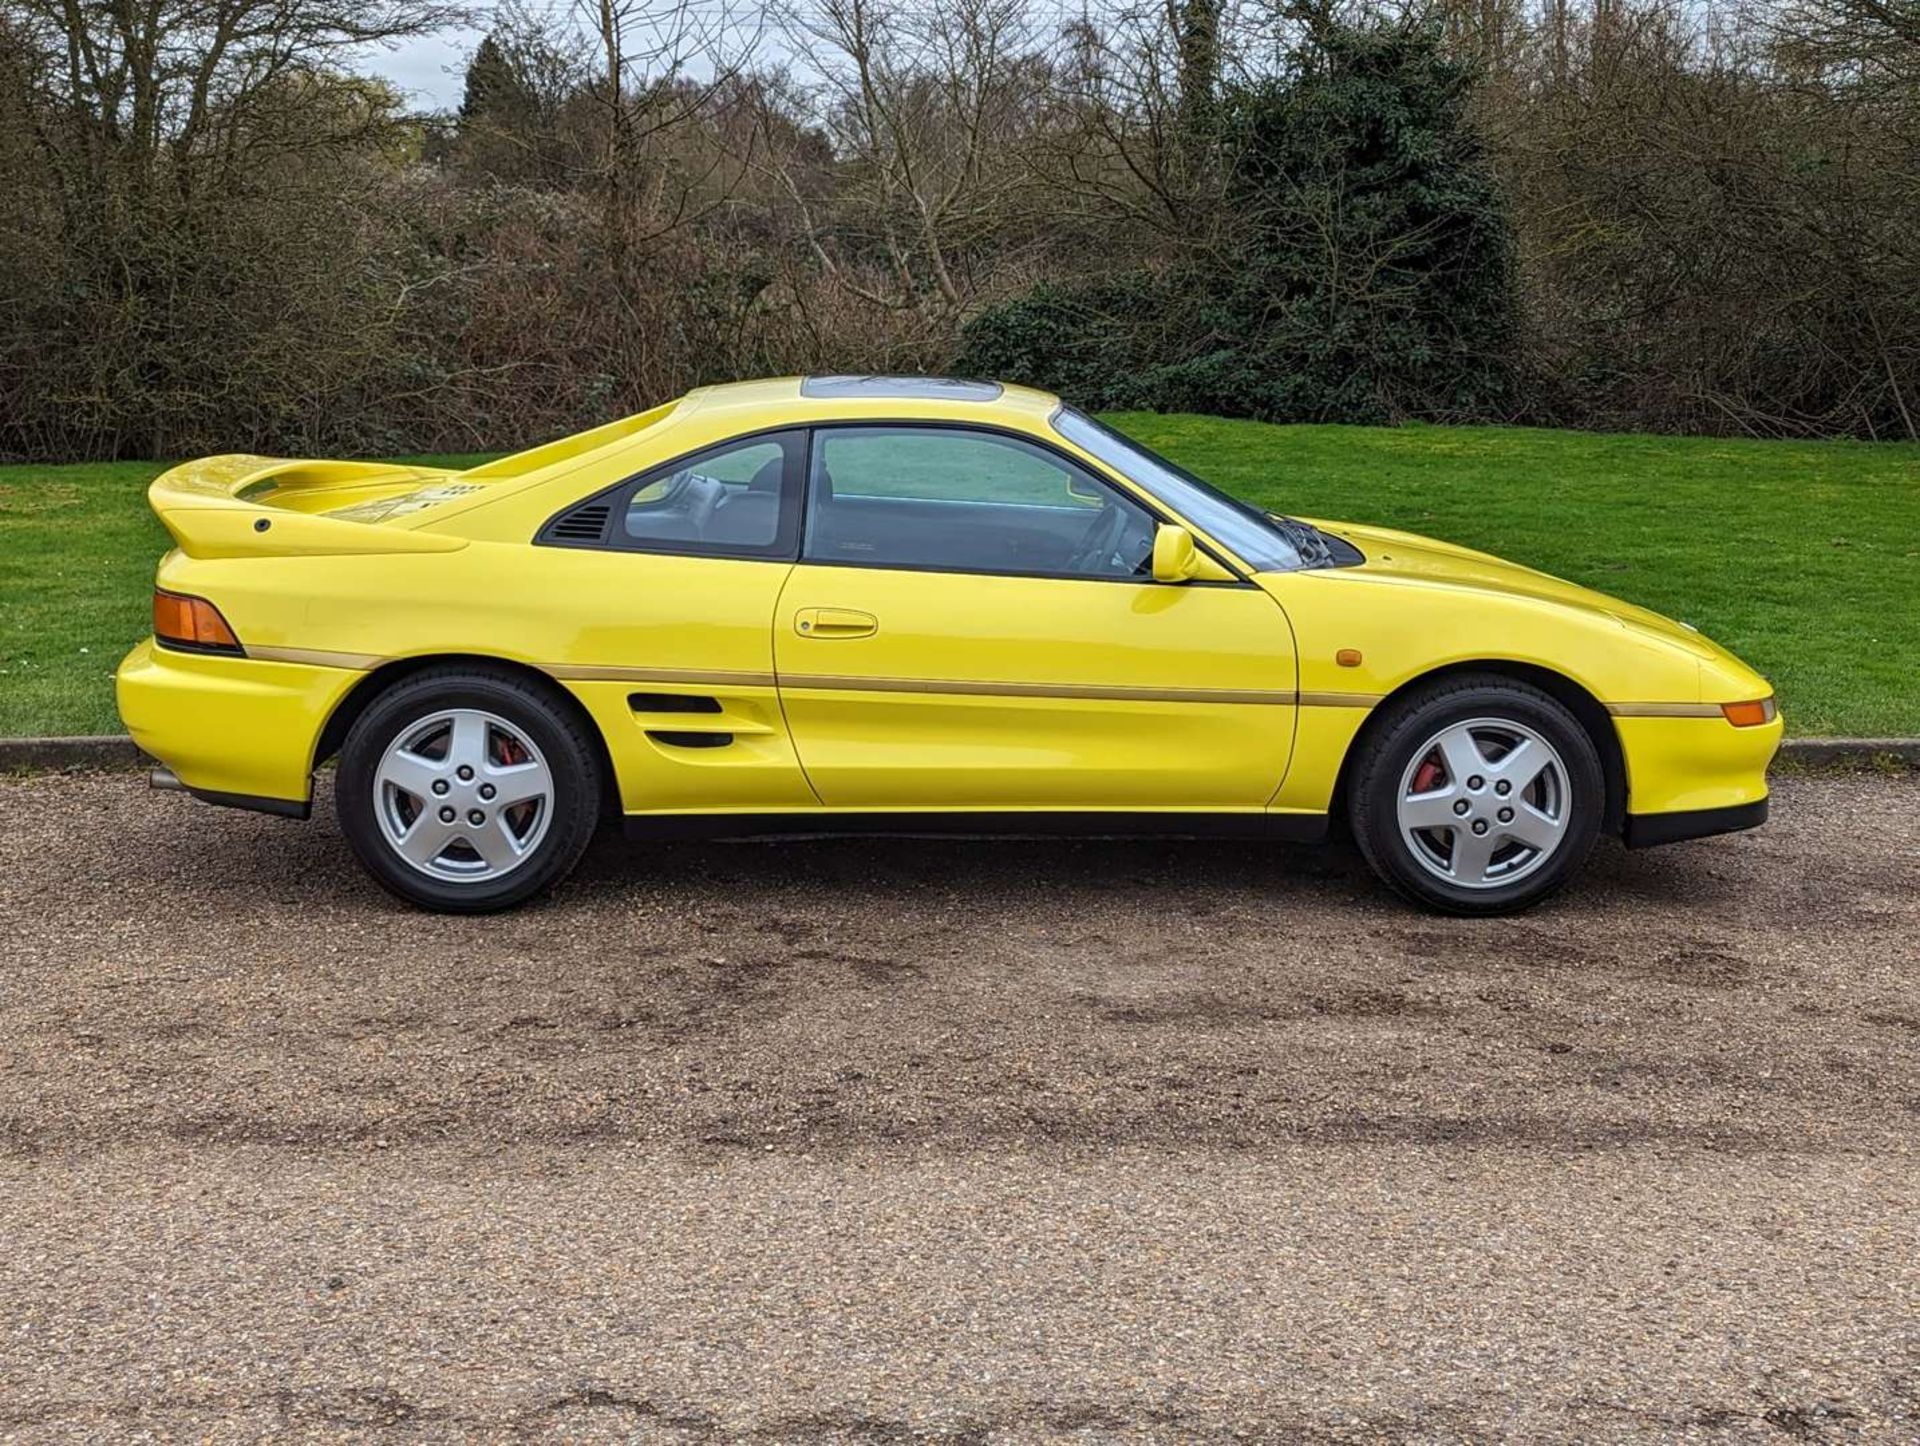 1993 TOYOTA MR2 GT - Image 8 of 29